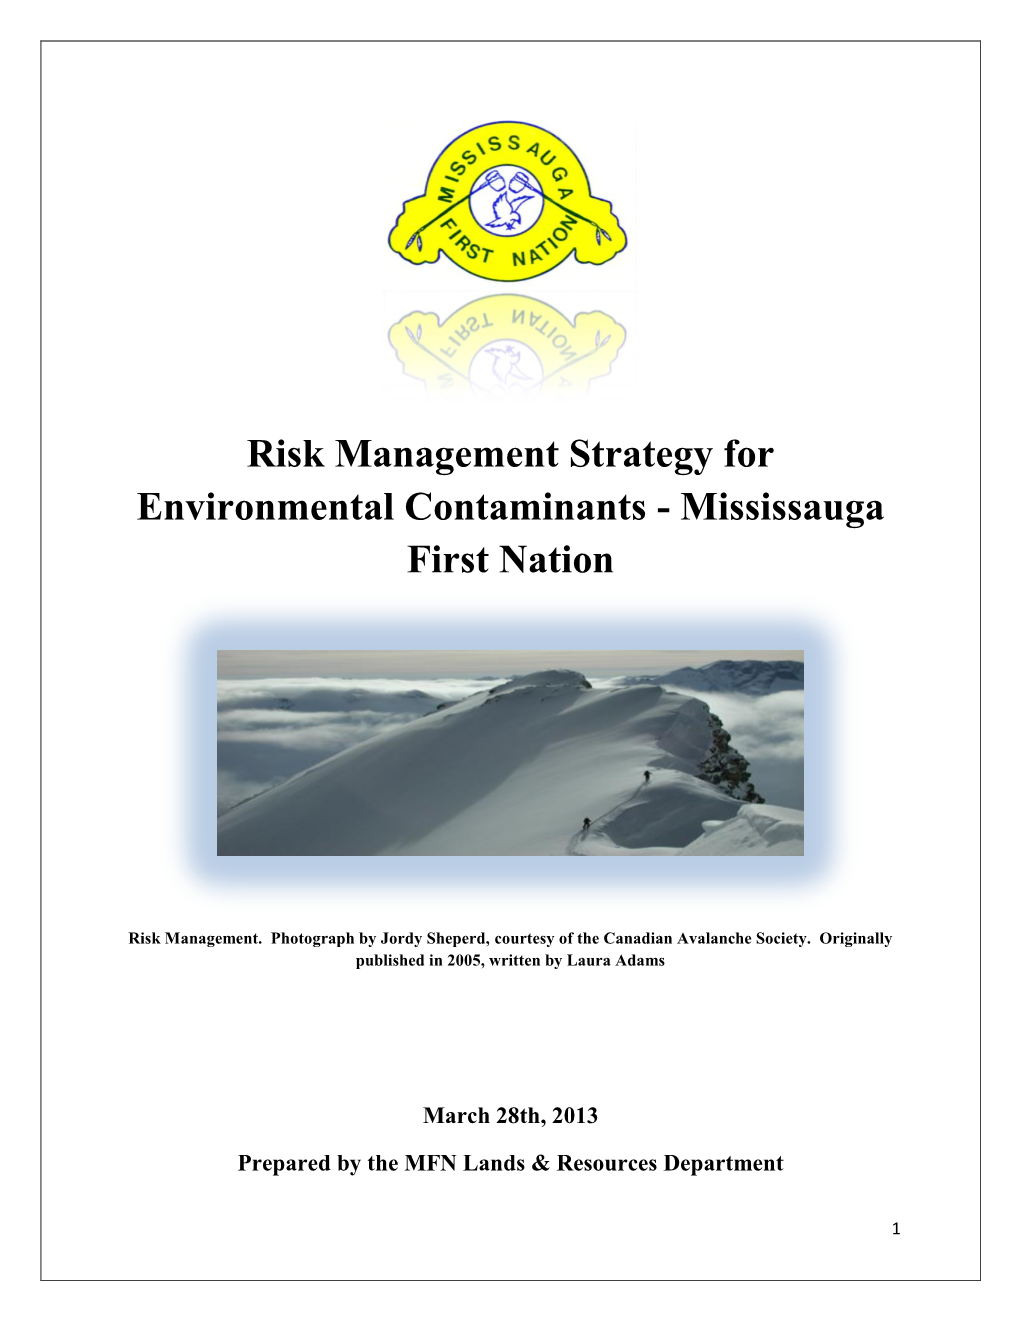 Risk Management Strategy for Environmental Contaminants - Mississauga First Nation